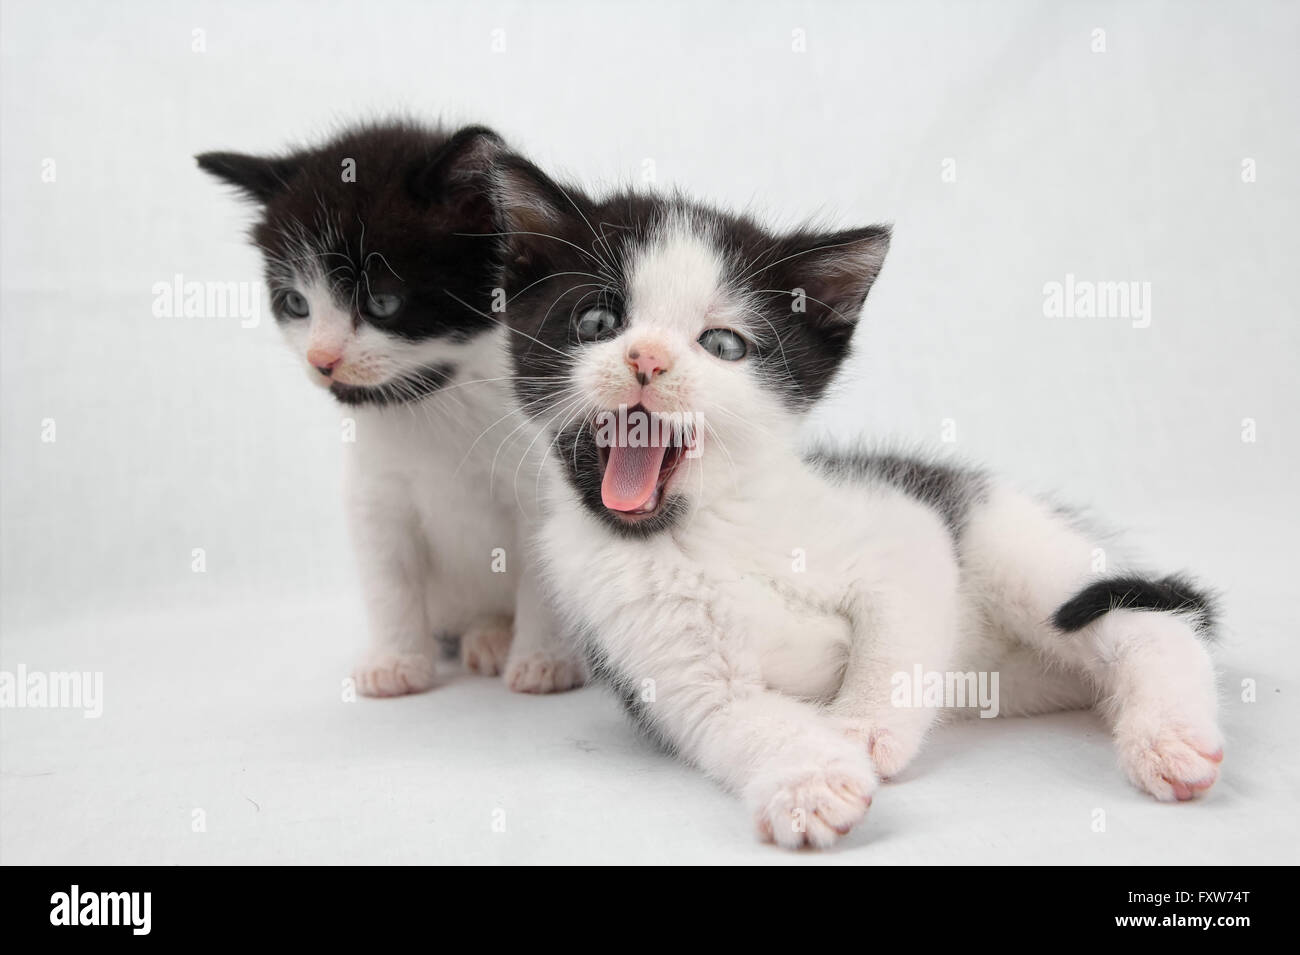 Two kittens, one is staring one is yawning Stock Photo